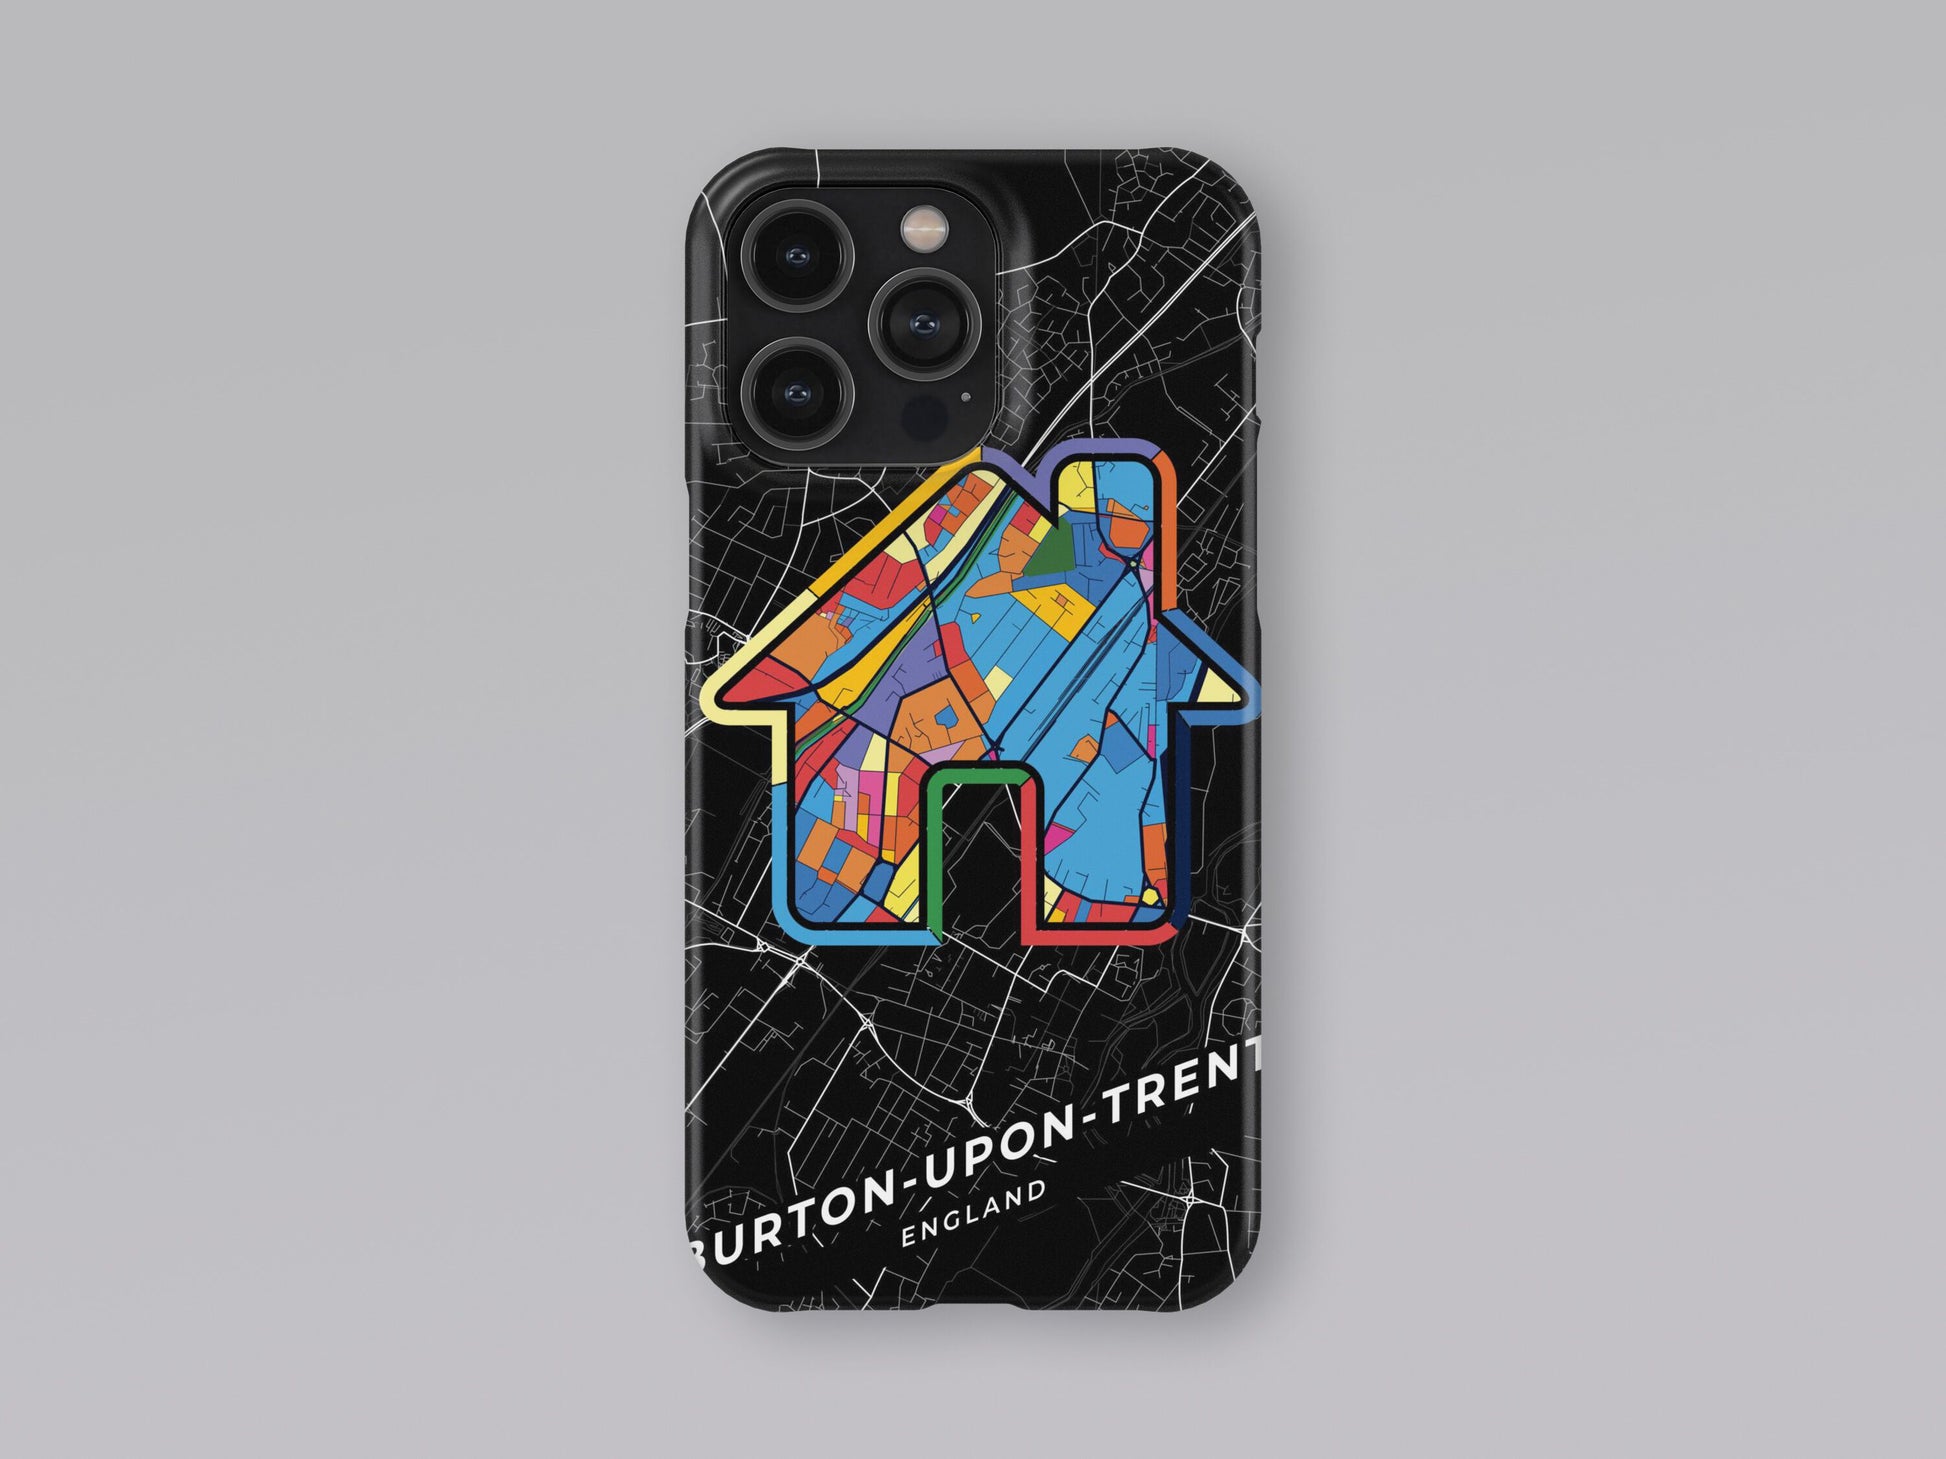 Burton-Upon-Trent England slim phone case with colorful icon. Birthday, wedding or housewarming gift. Couple match cases. 3